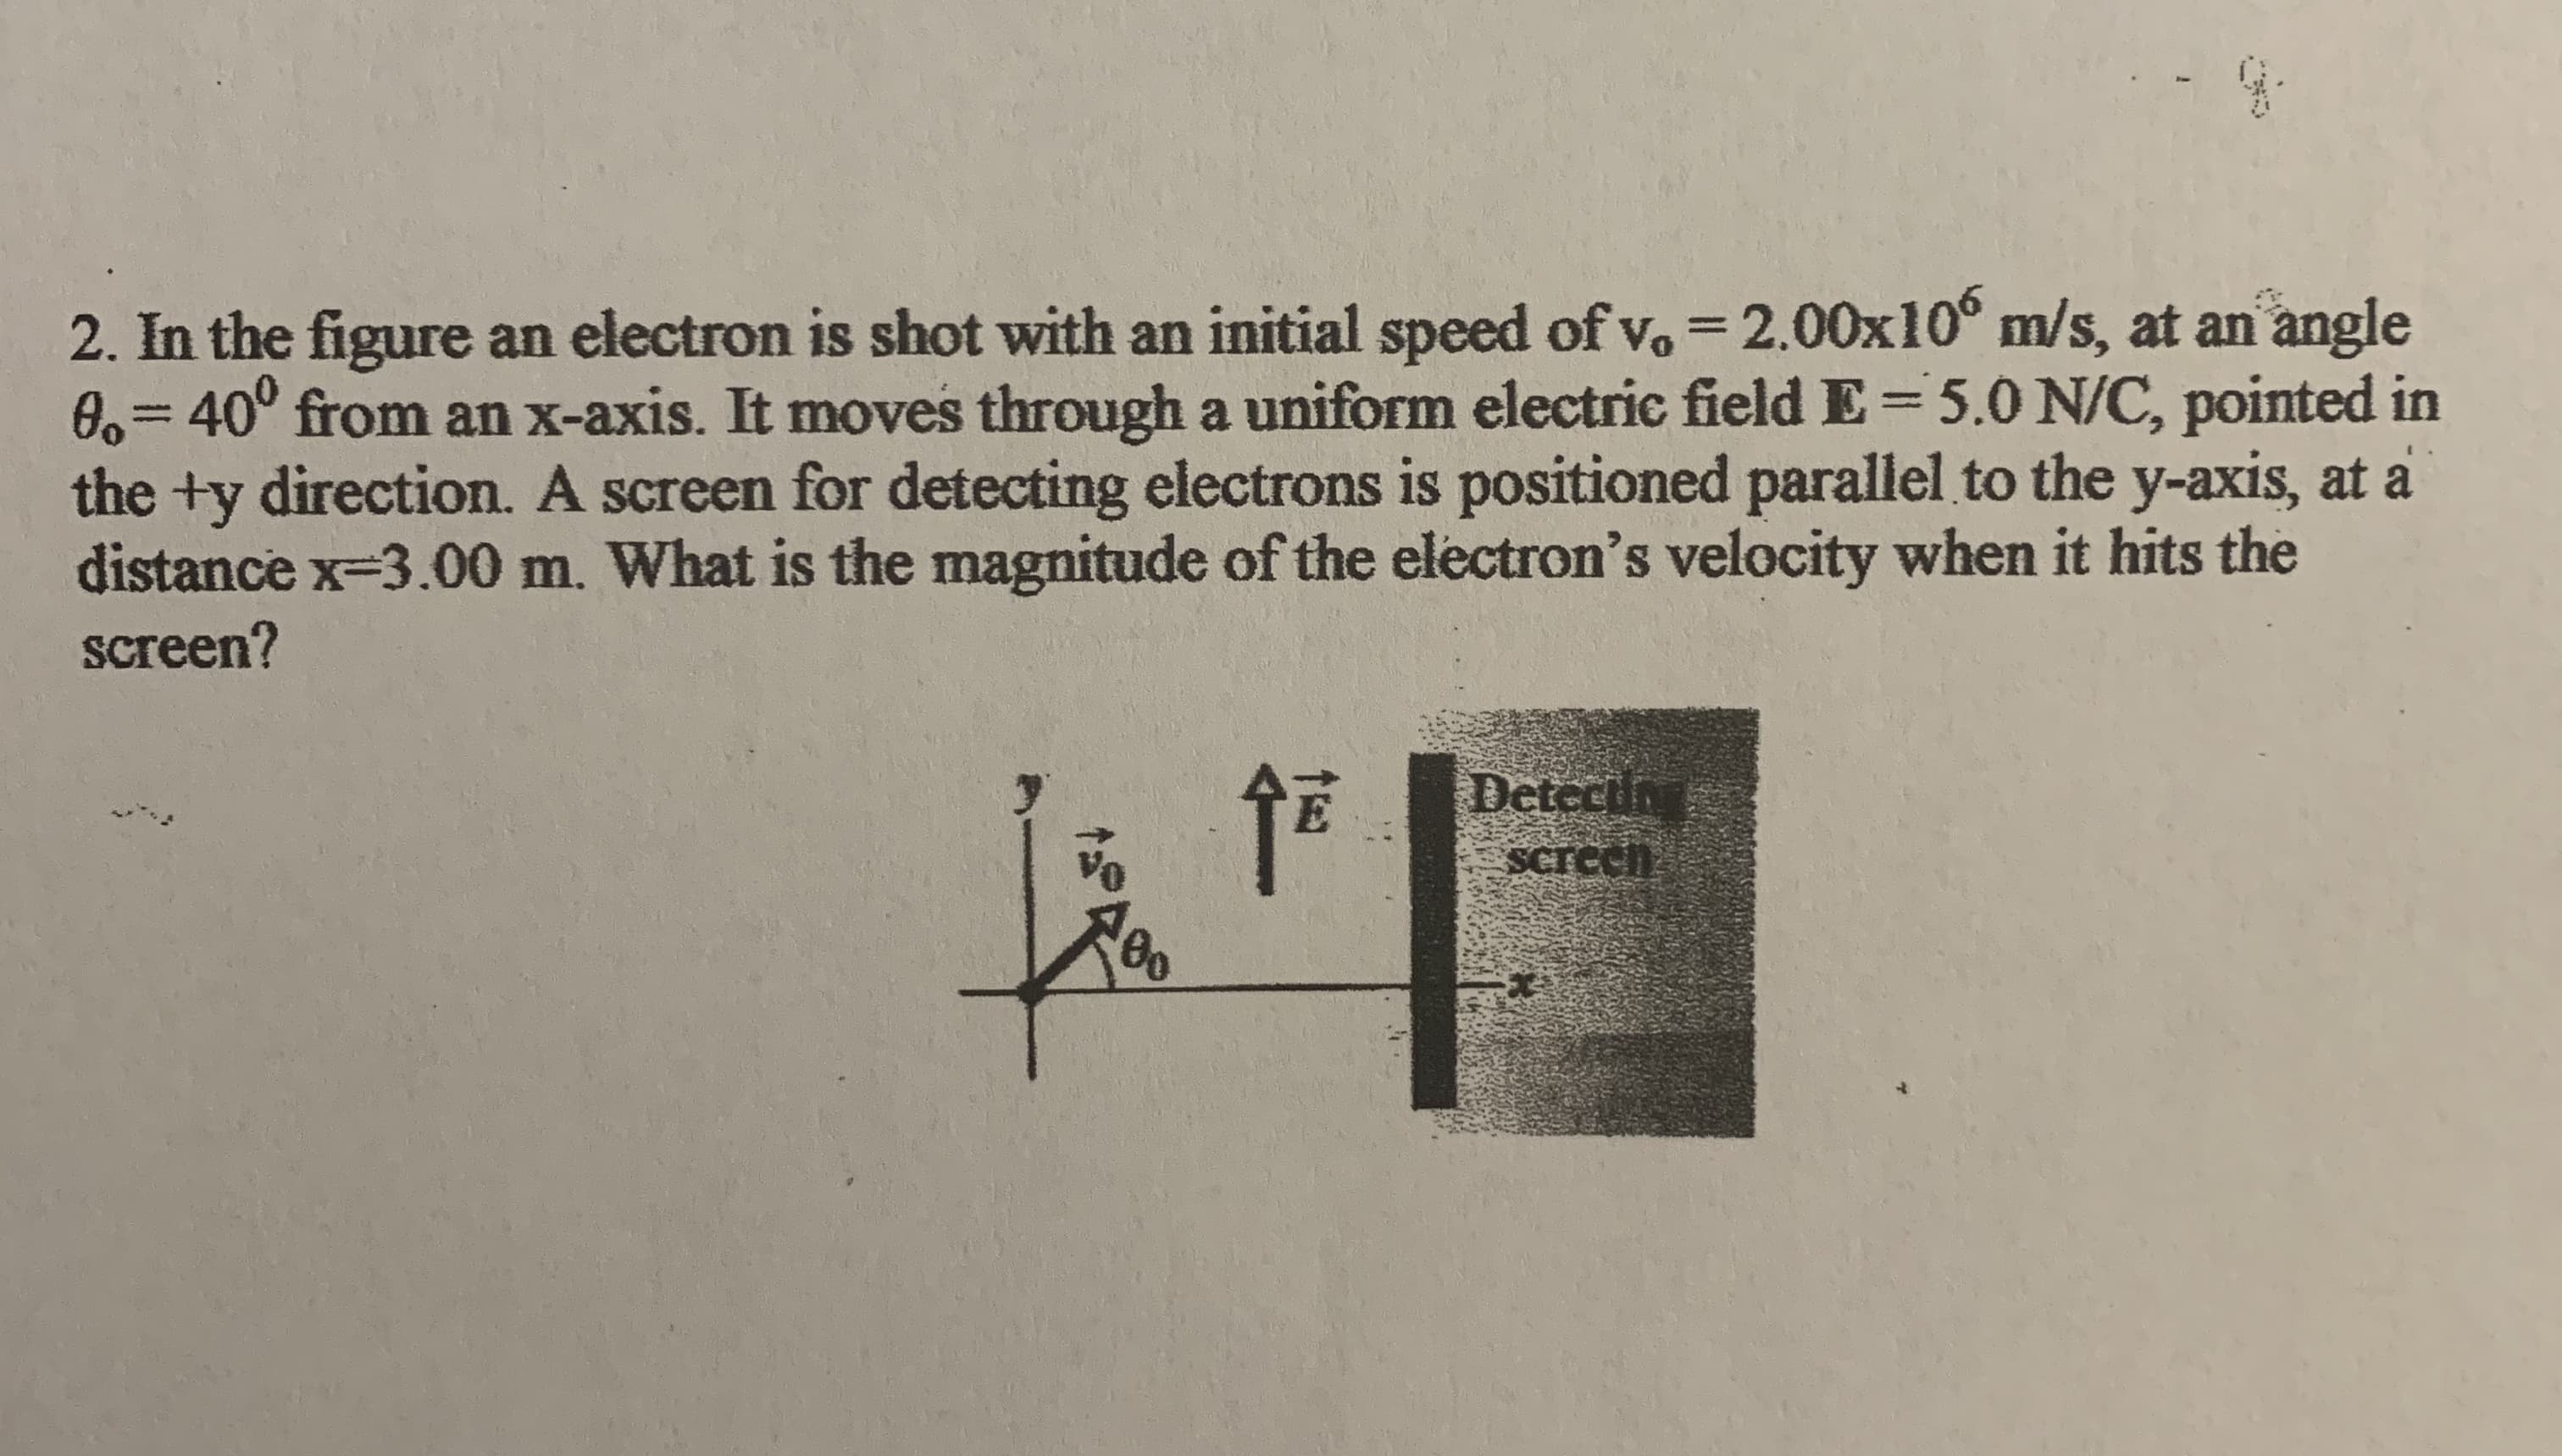 2. In the figure an electron is shot with an initial speed of vo = 2.00x10° m/s, at an angle
0,340° from an x-axis. It moves through a uniform electric field E=5.0 N/C, pointed in
the +y direction. A screen for detecting electrons is positioned parallel to the y-axis, at a
distance x-3.00 m. What is the magnitude of the electron's velocity when it hits the
screen?
%3D
Detectin
Screeh
